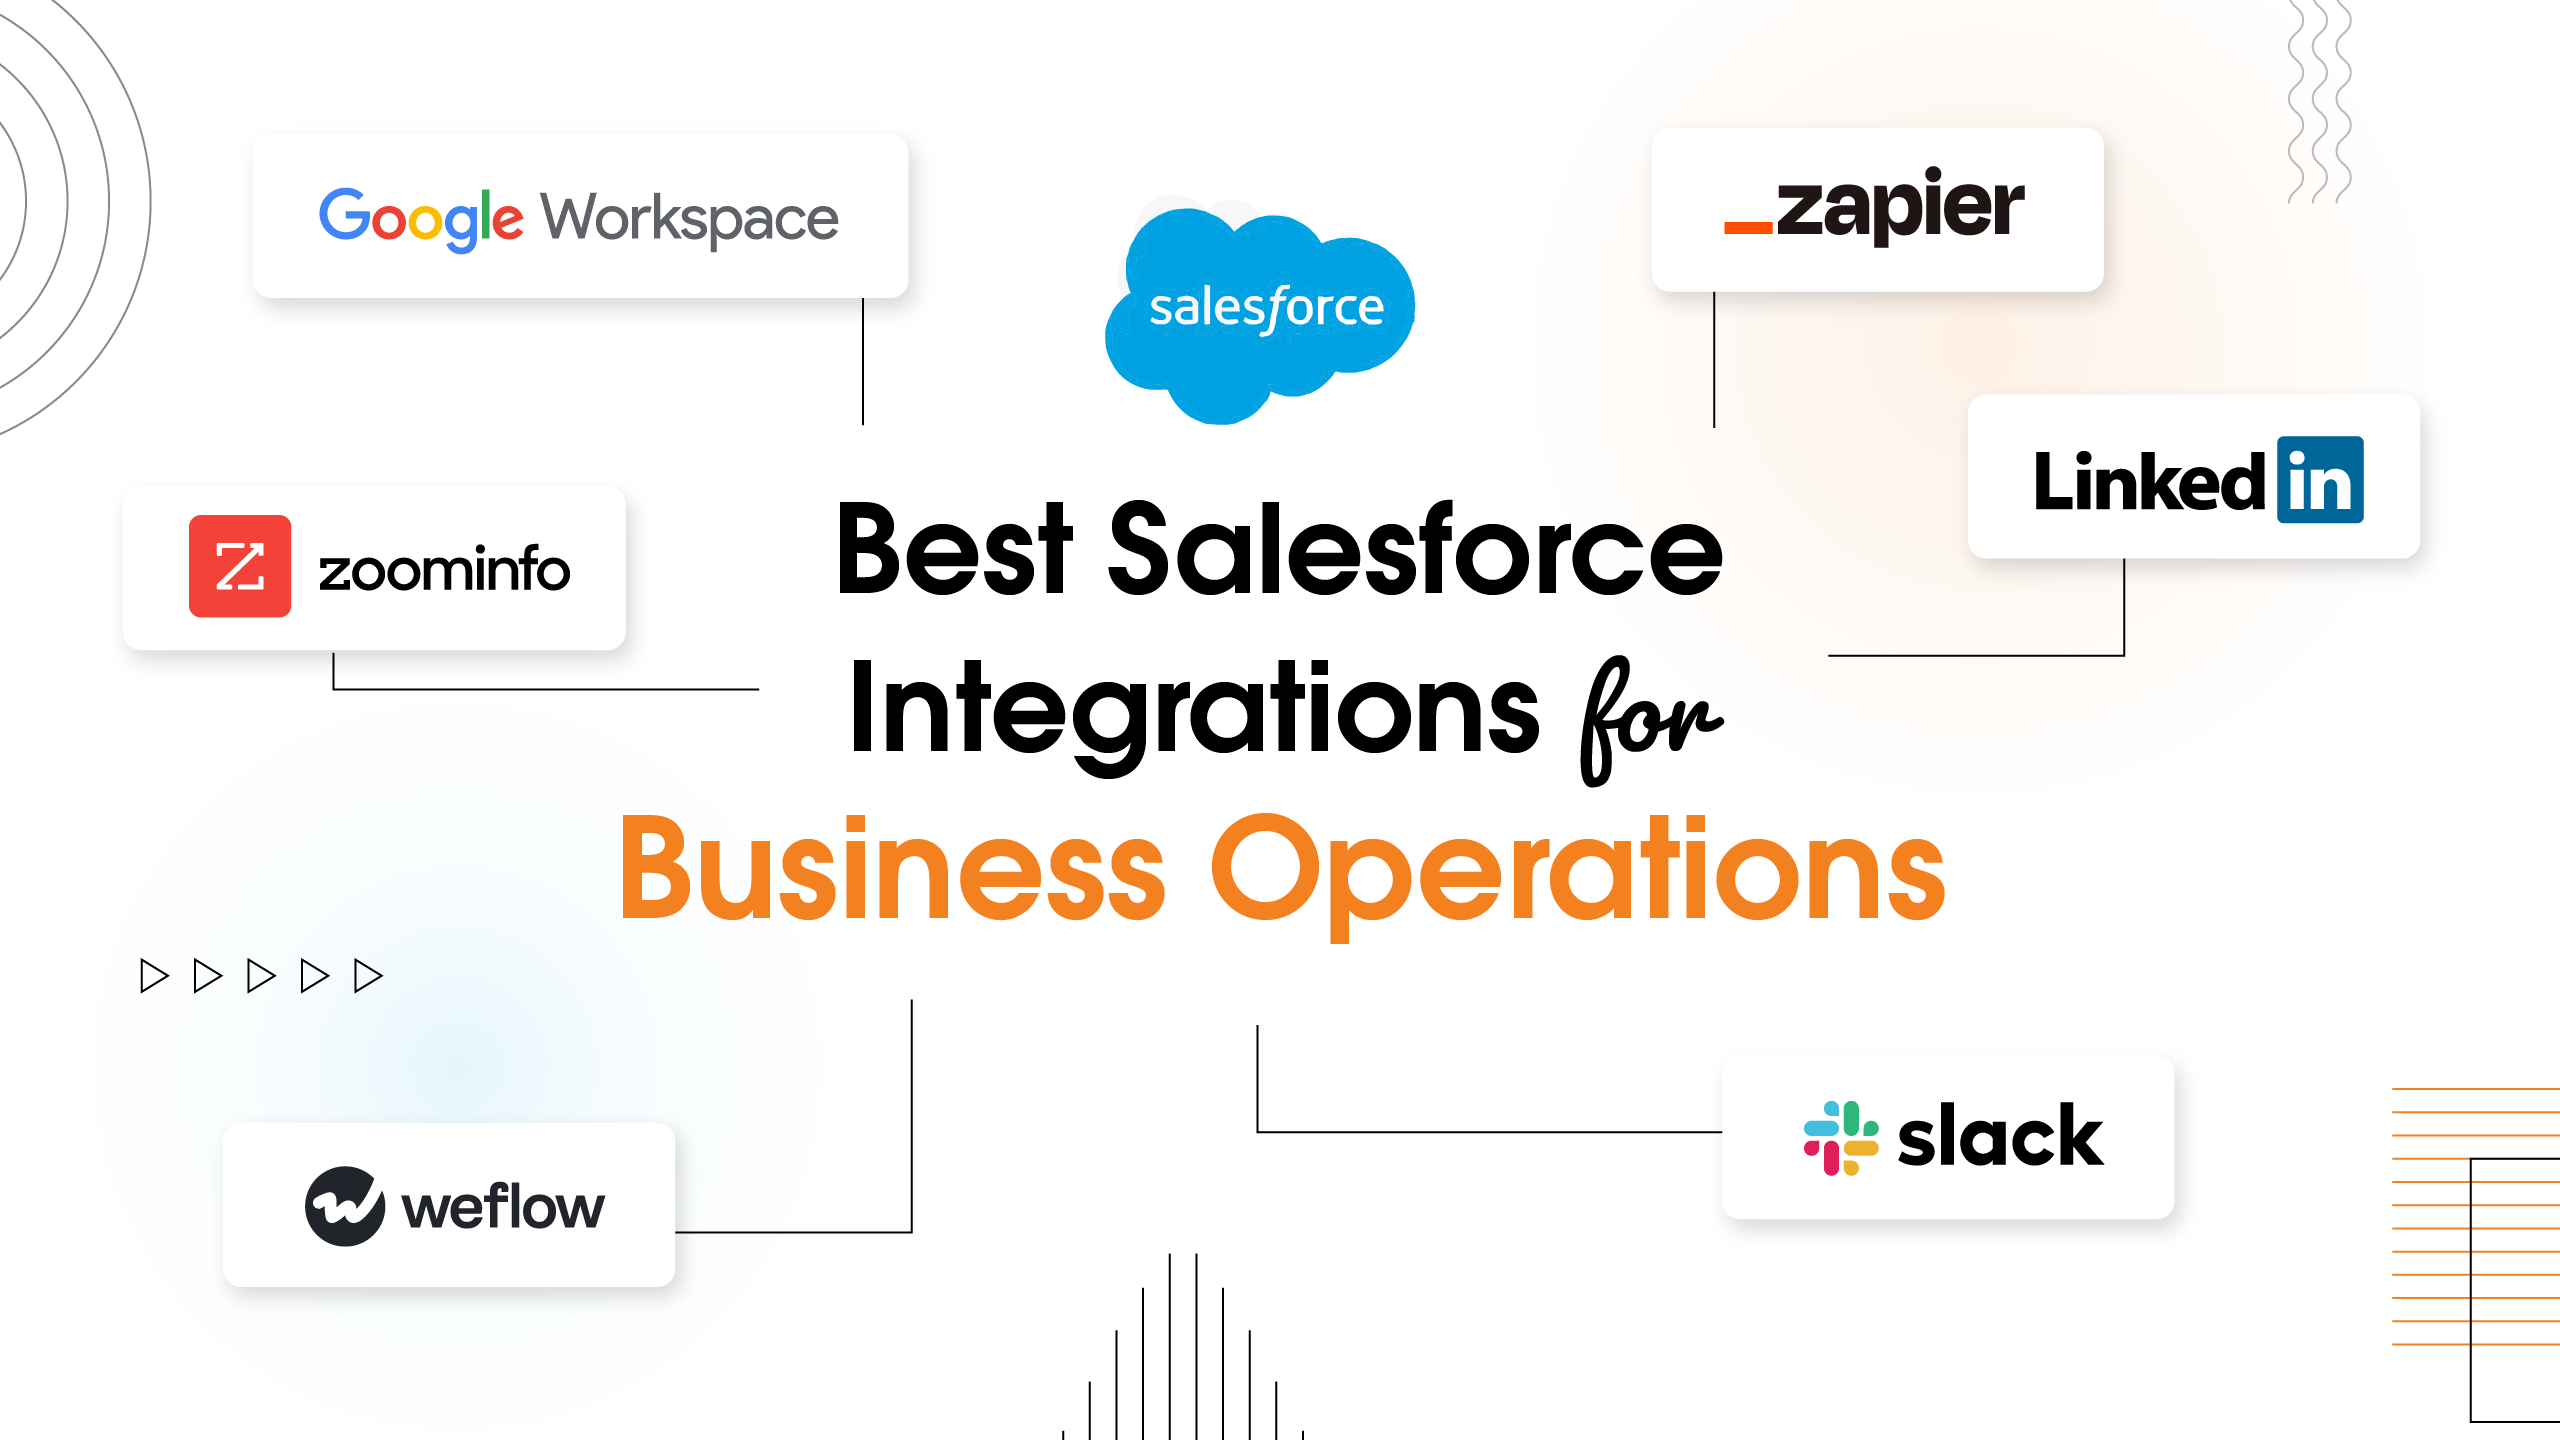 13 Best Salesforce Integrations For Business Operations